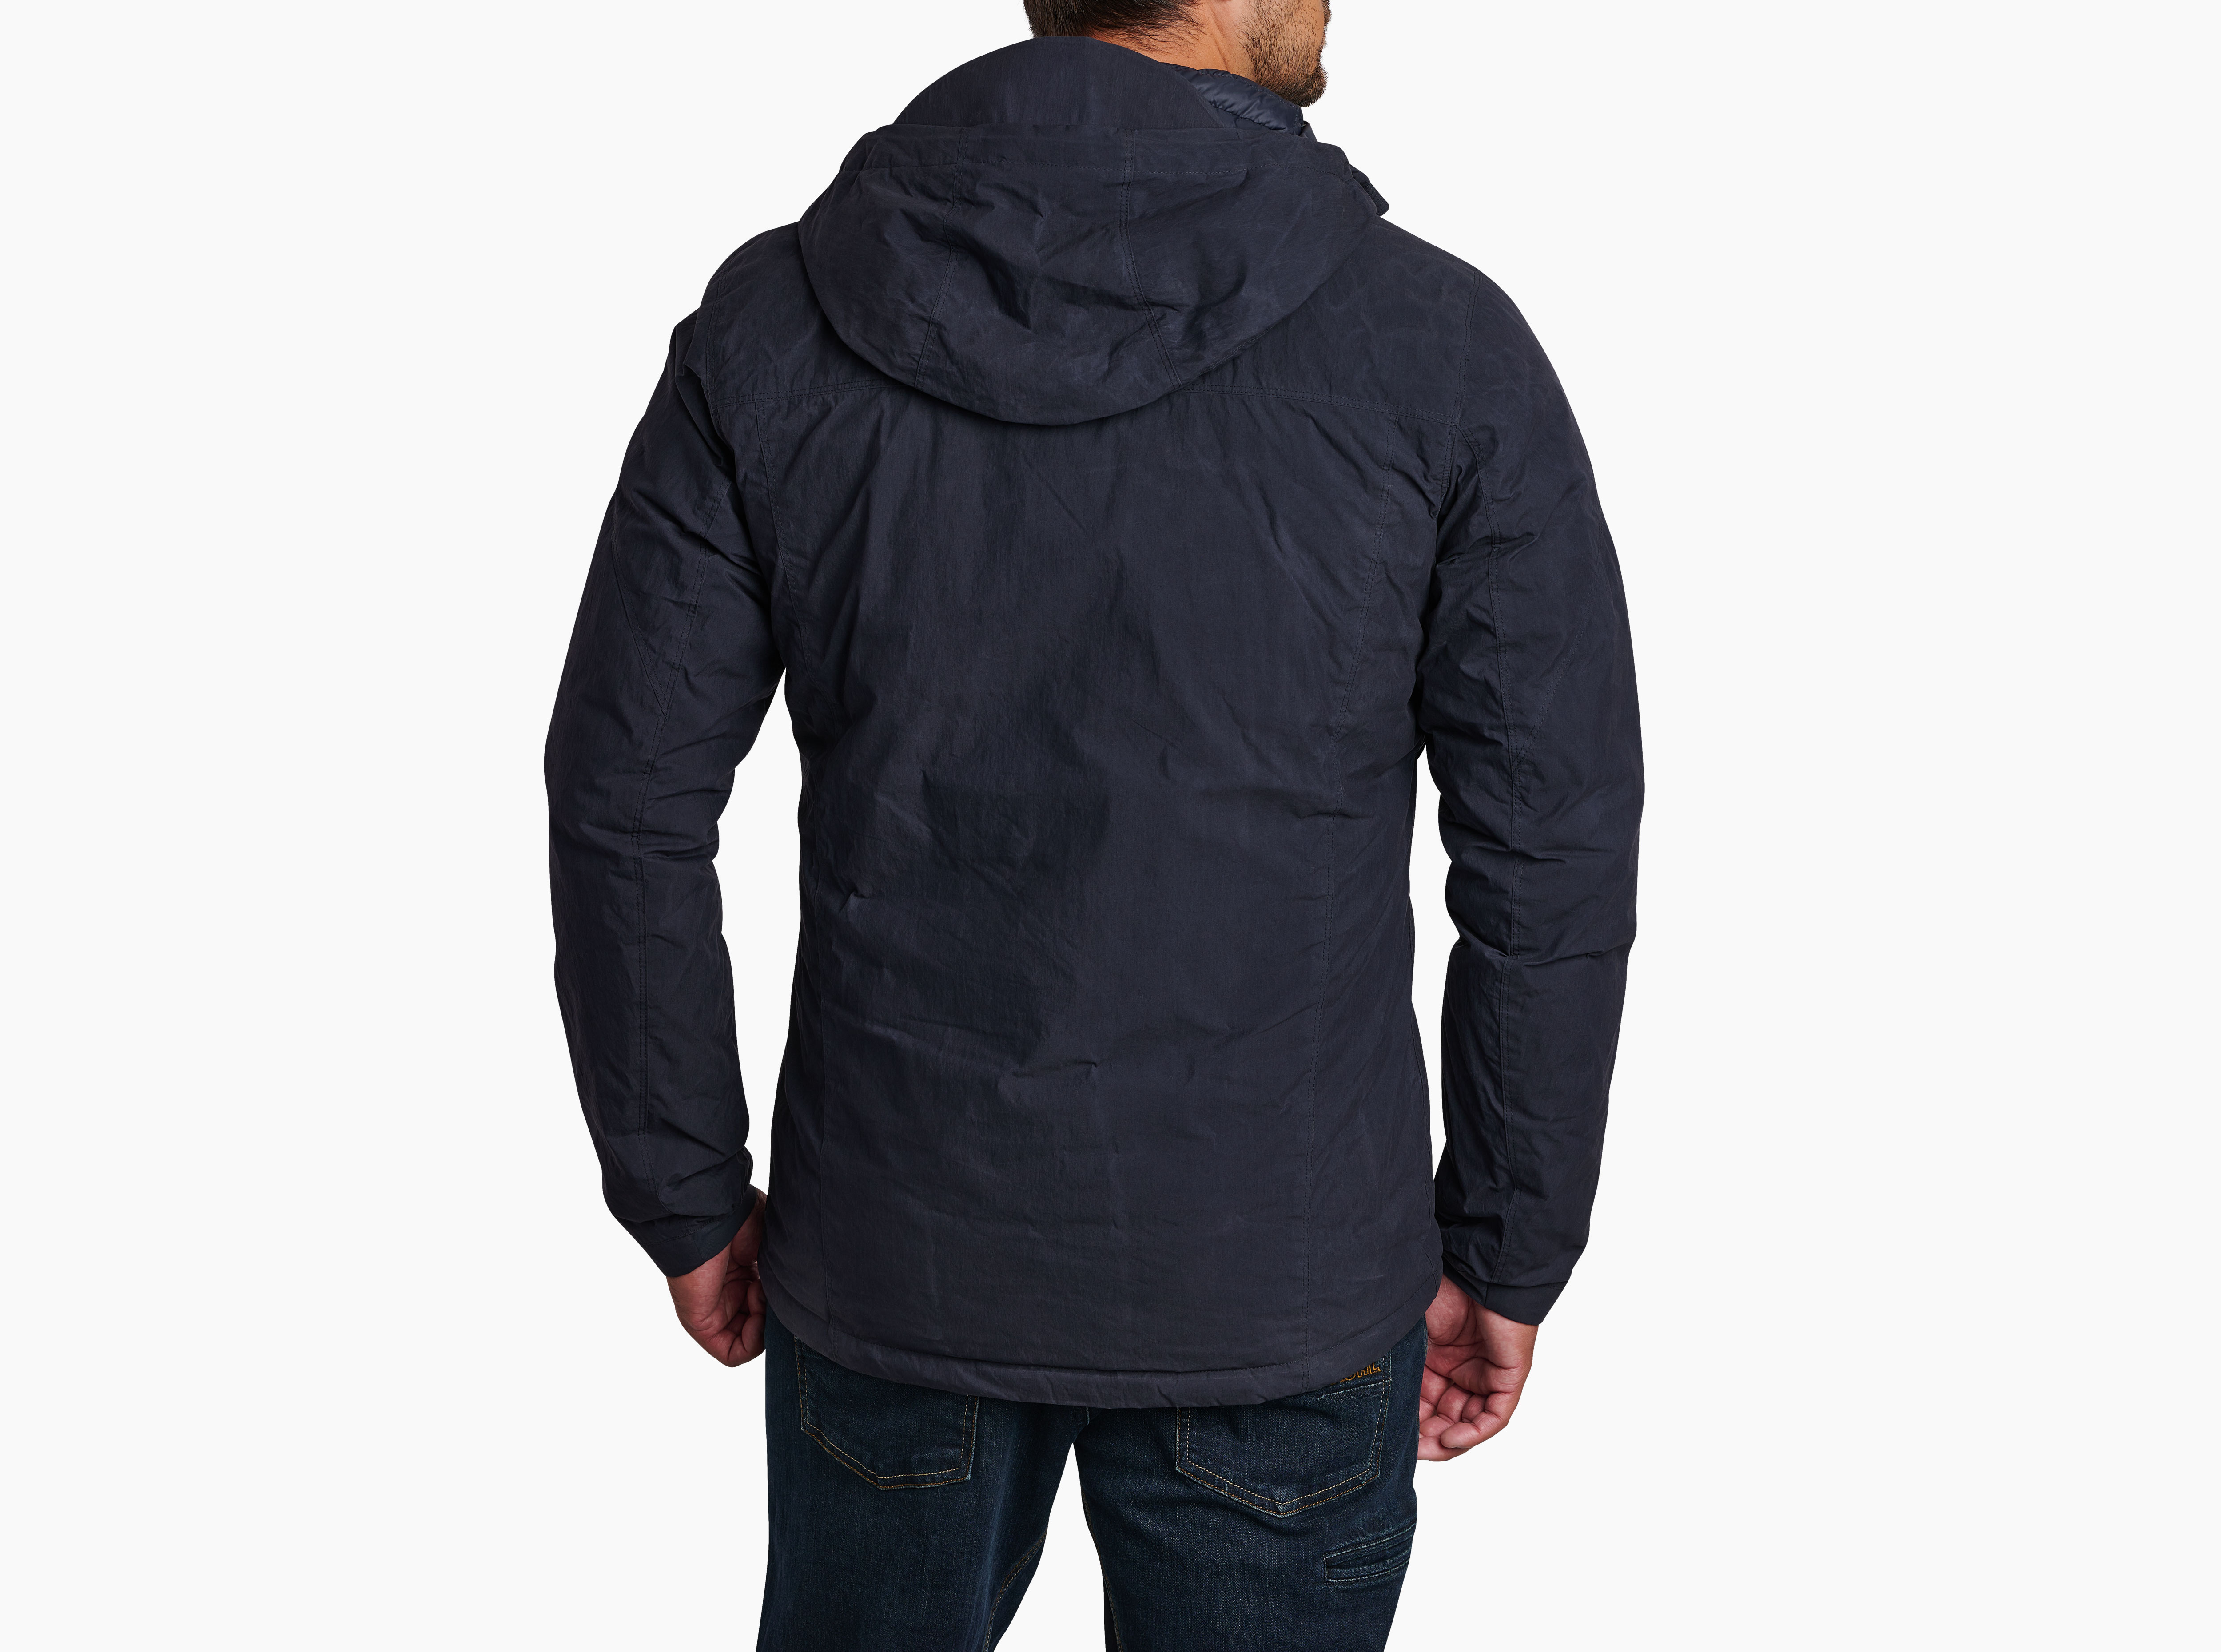 Kuhl Wyldfire Hoody - Great 800 Fill RDS Down in a Waxed Cotton Stylish  Jacket - Engearment